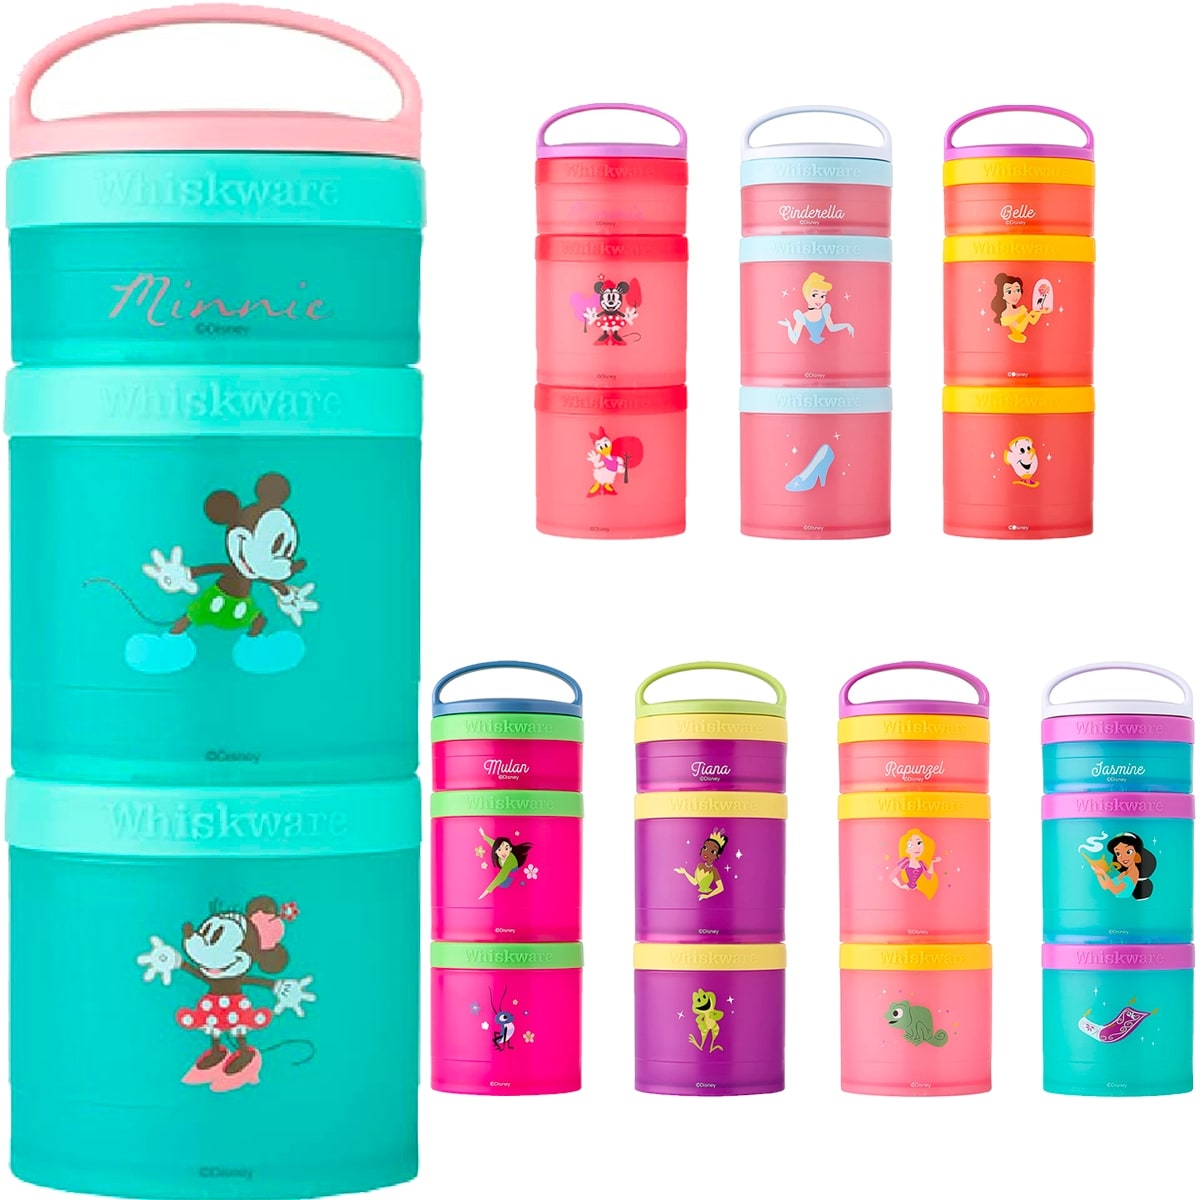 Whiskware Disney/Pixar Stackable Snack Pack Containers